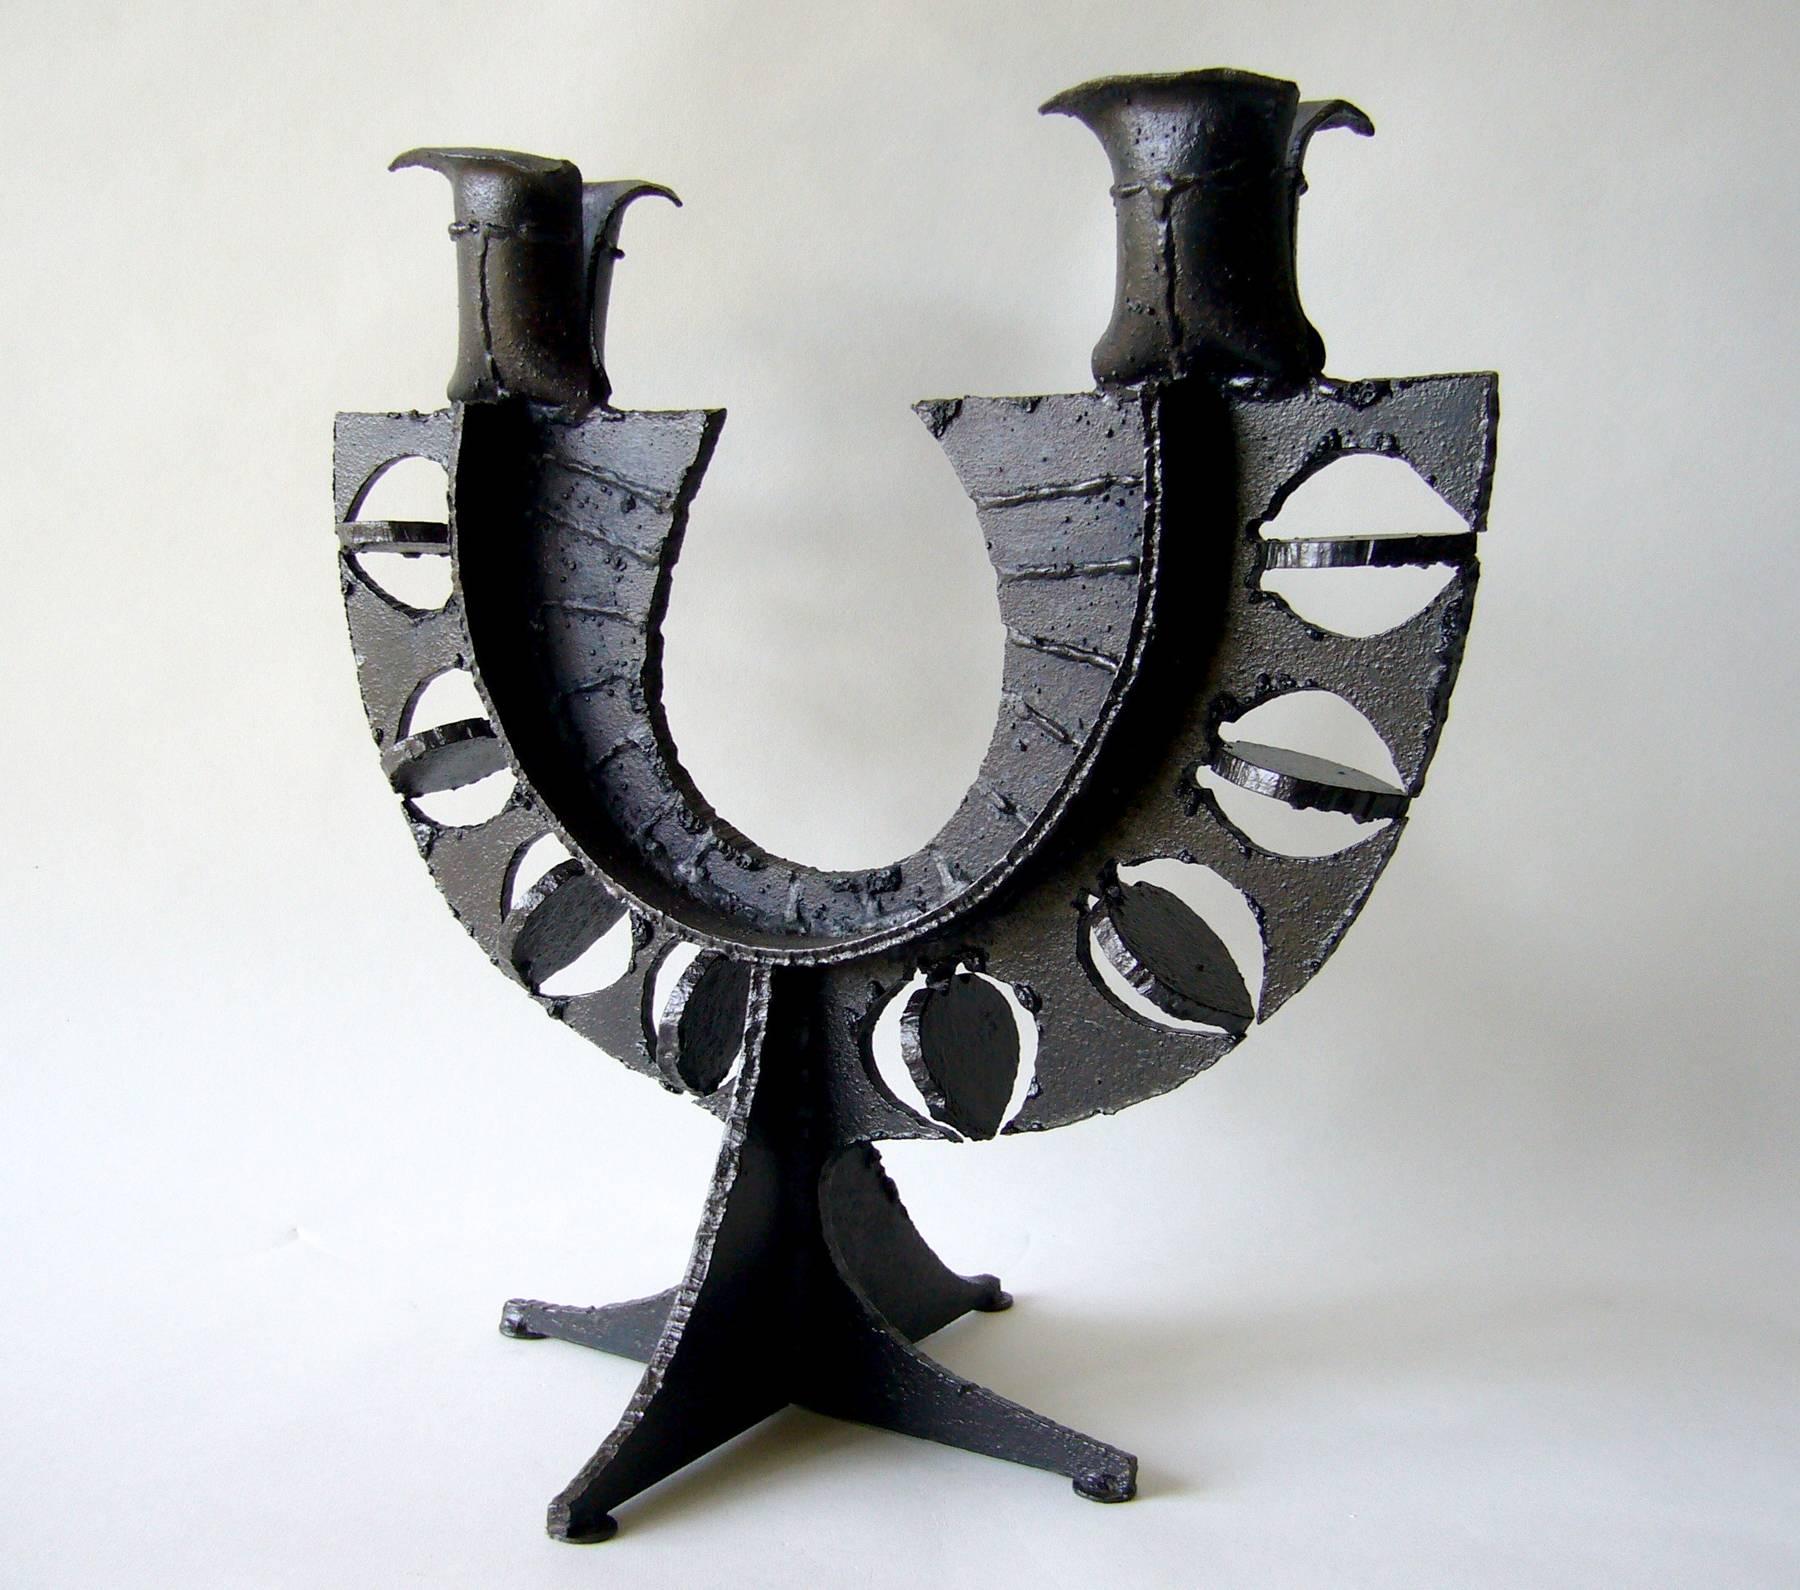 Torch cut metal candelabra in the Brutalist style created circa 1960s. Candelabra measures 16